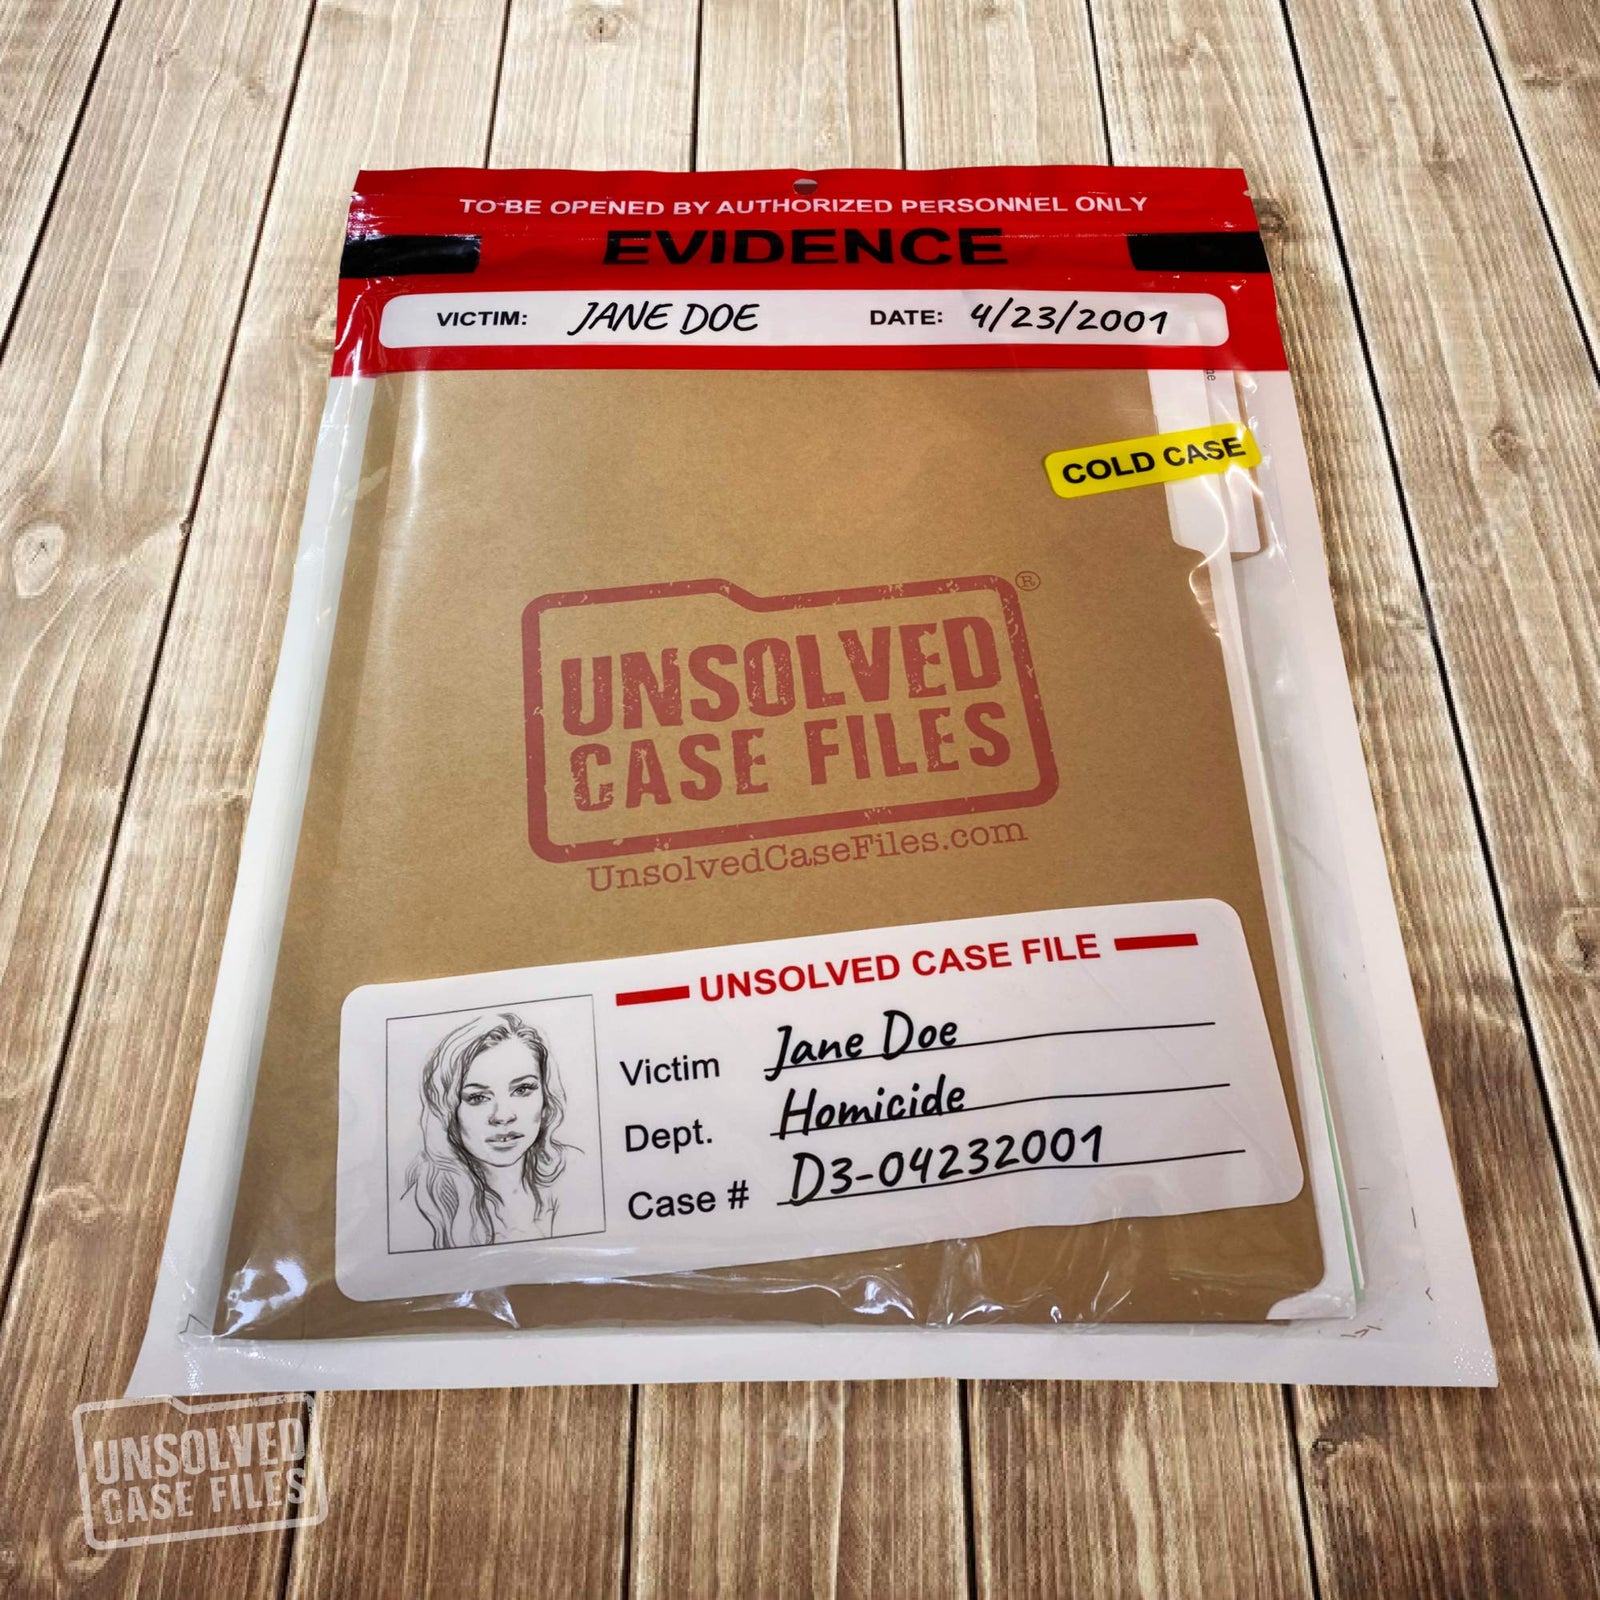 UNSOLVED CASE FILES | Doe, Jane - Cold Case Murder Mystery Game - Can You Solve The Crime? Who Killed Jane Doe?